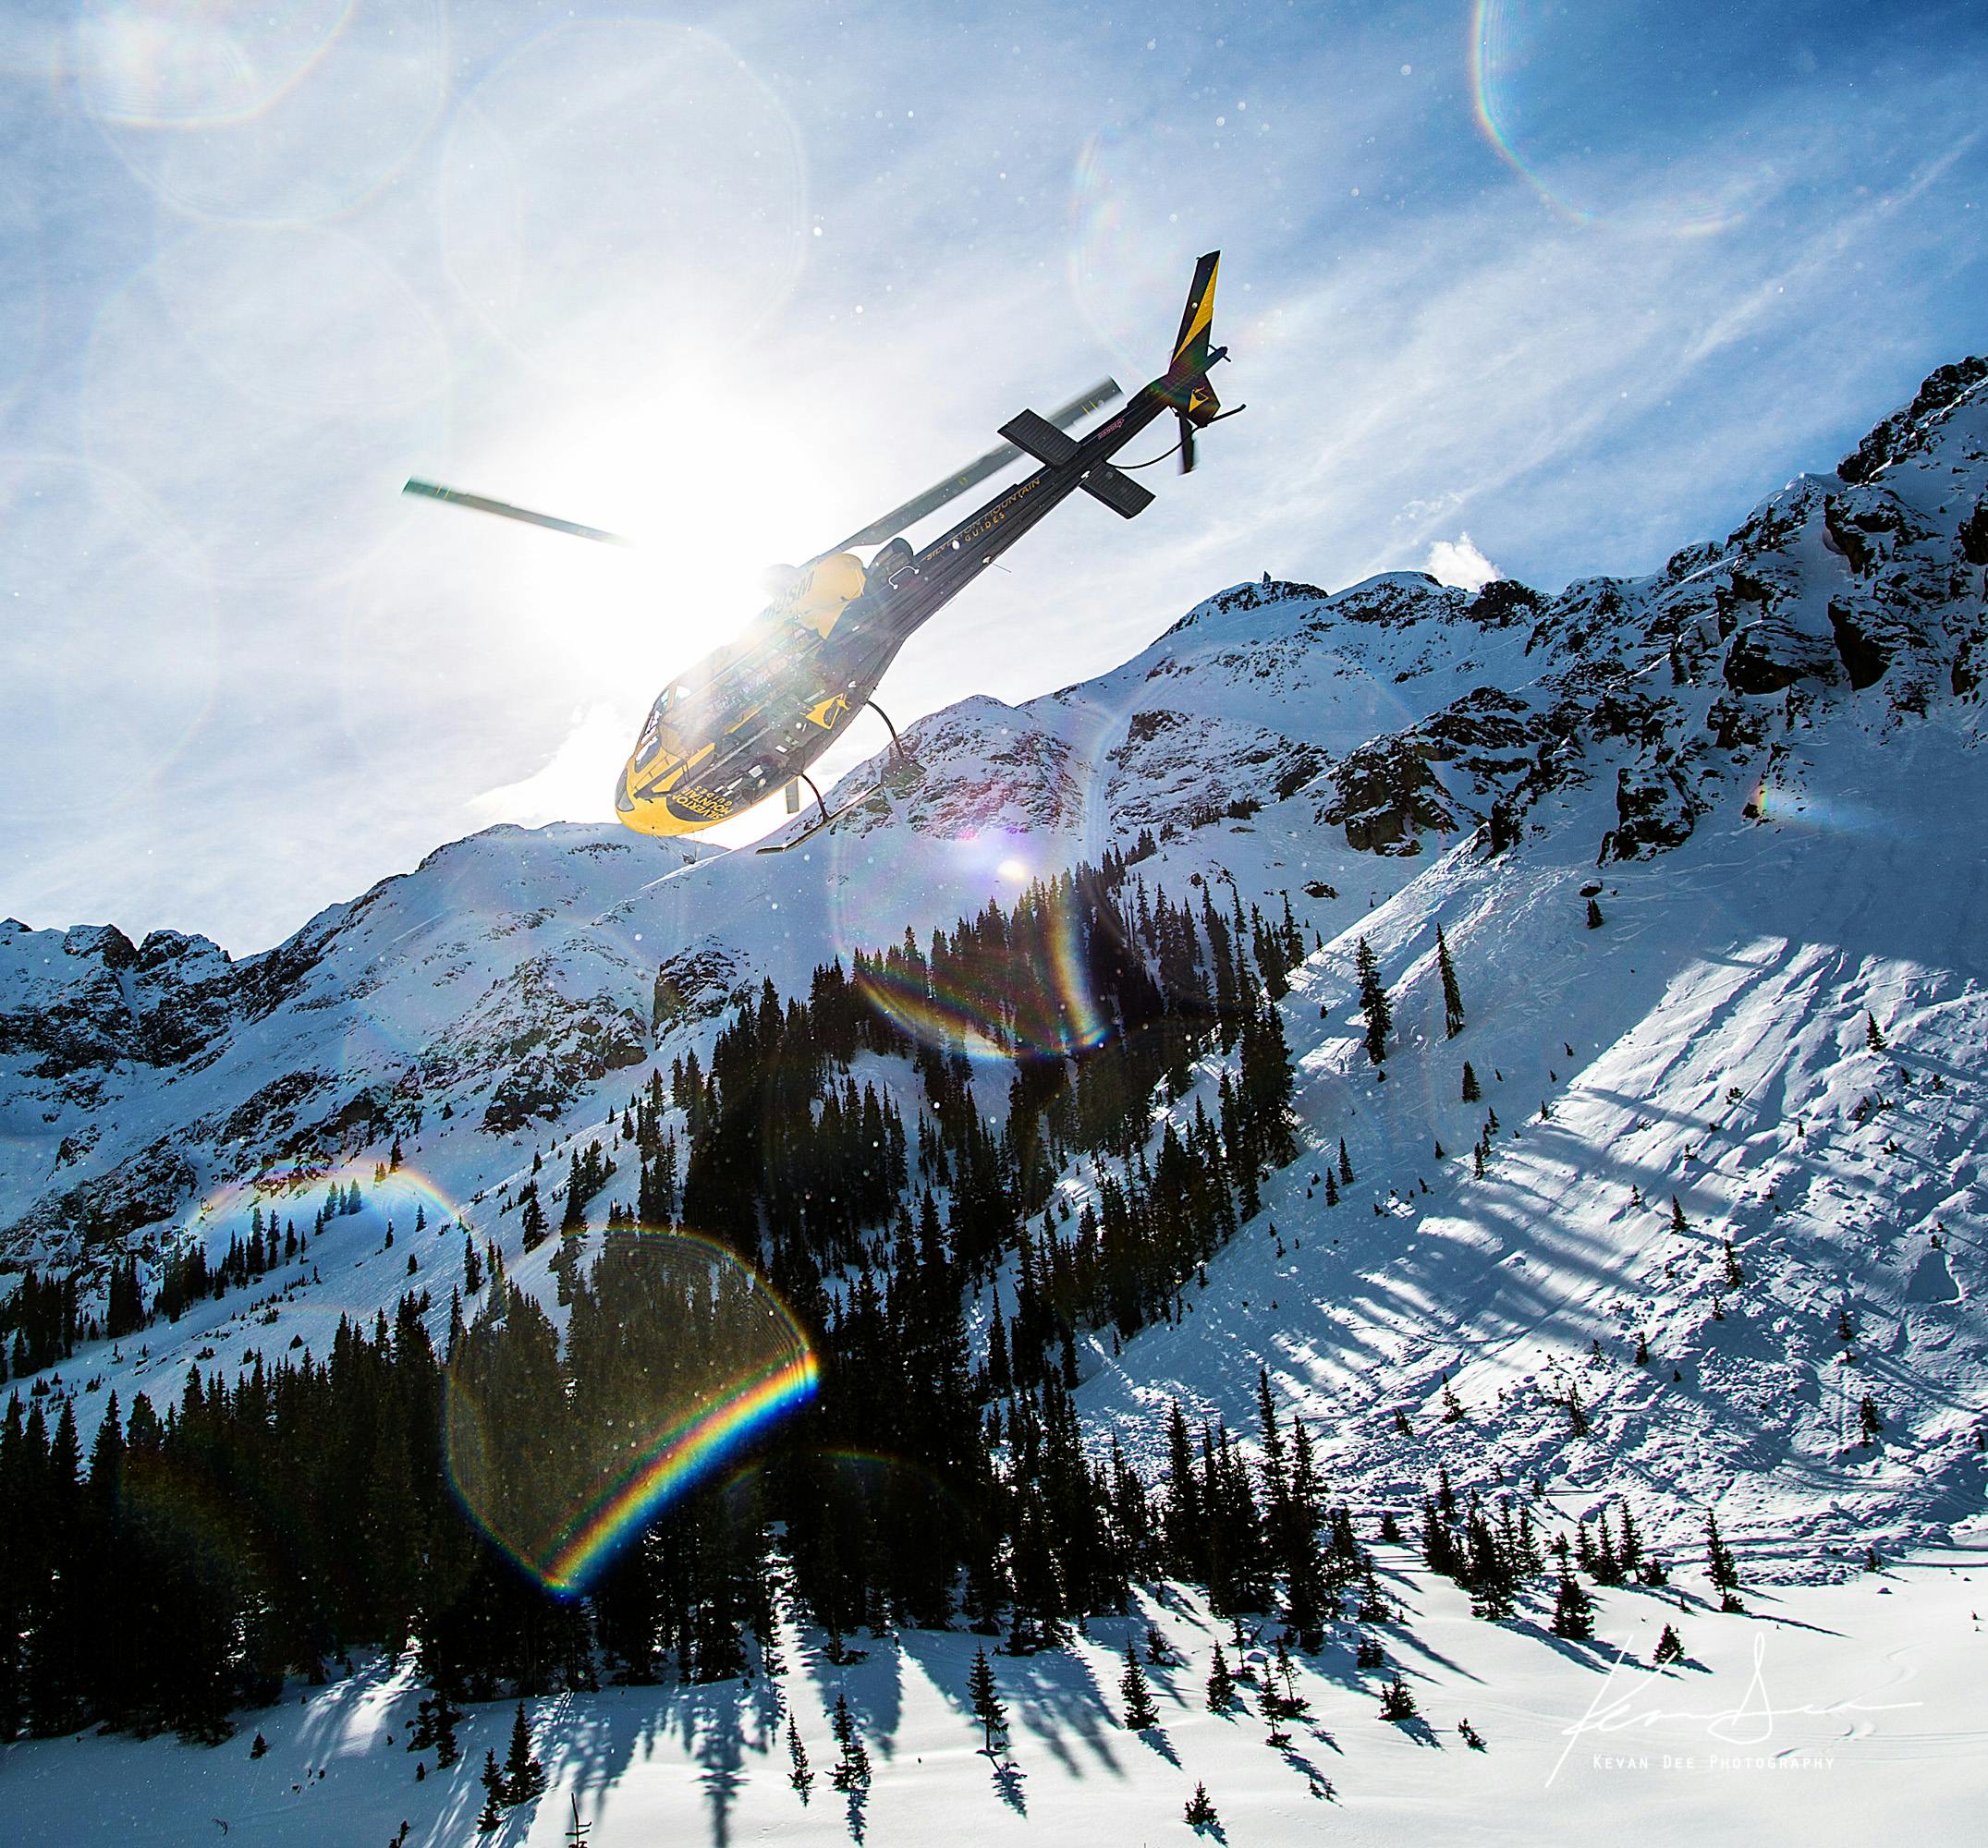 A helicopter takes off from a mountain.